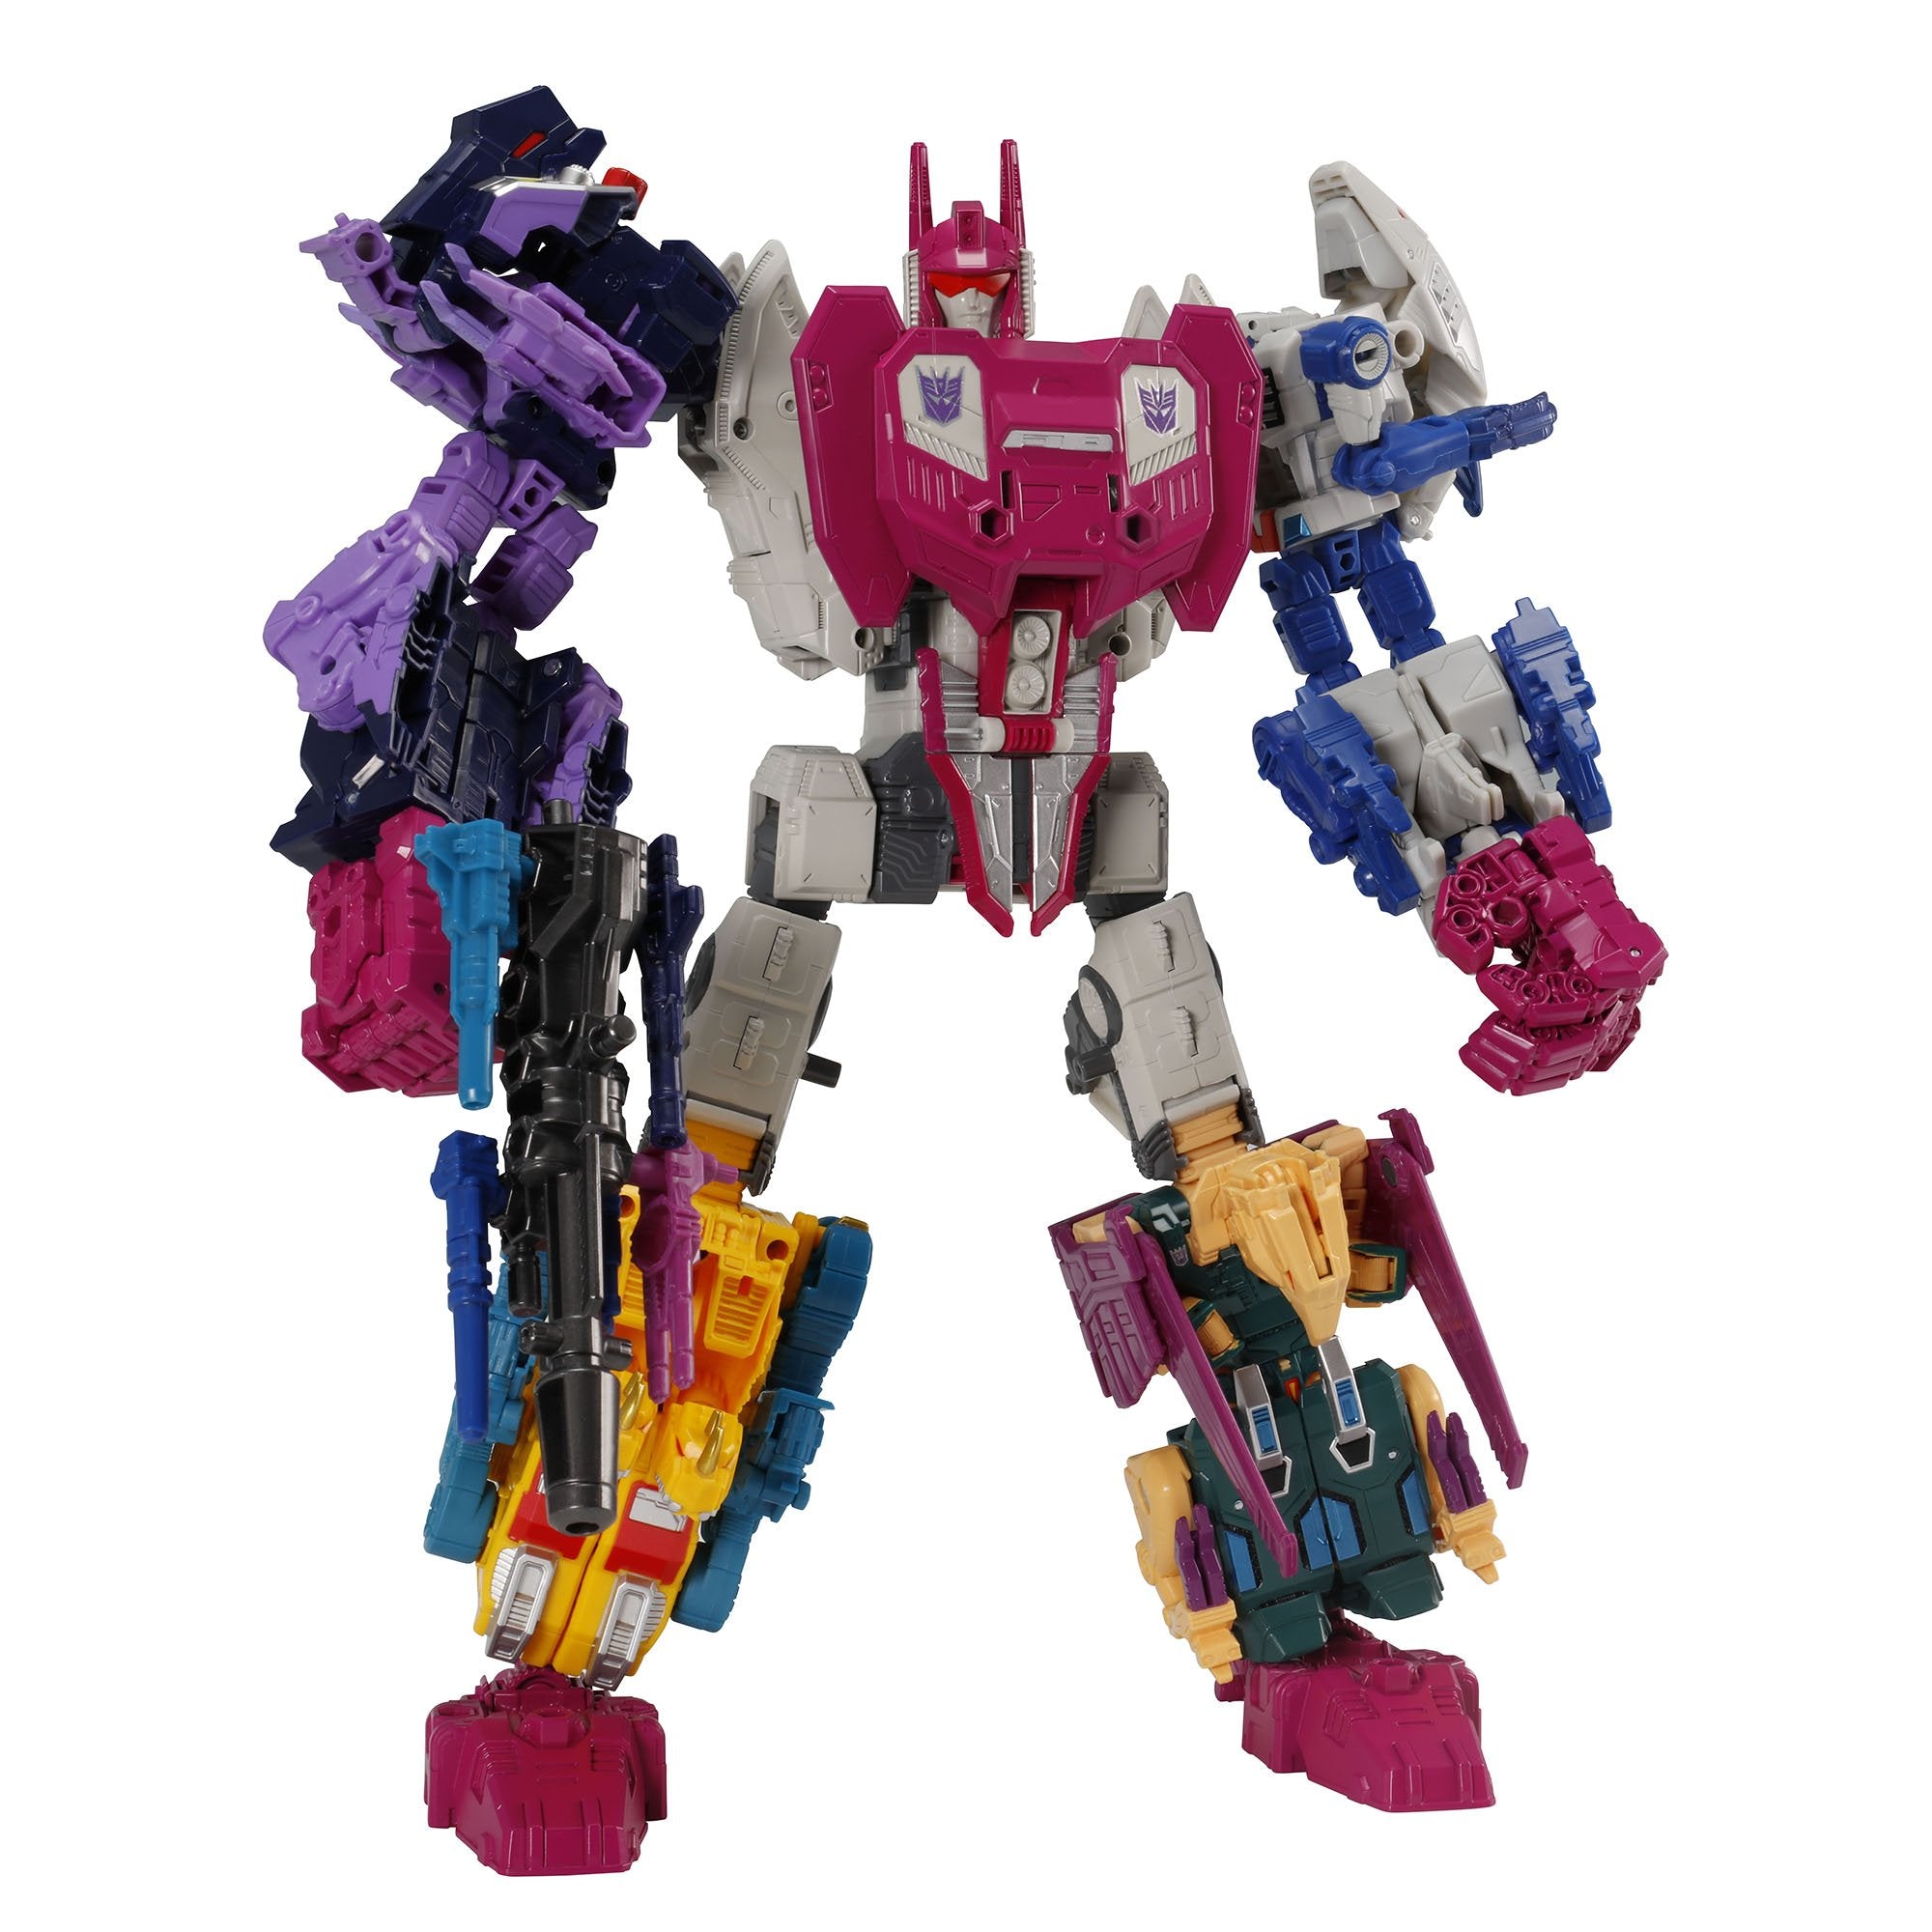 TakaraTomy - Transformers Generations Selects - Abominus (TakaraTomy Mall Exclusive)